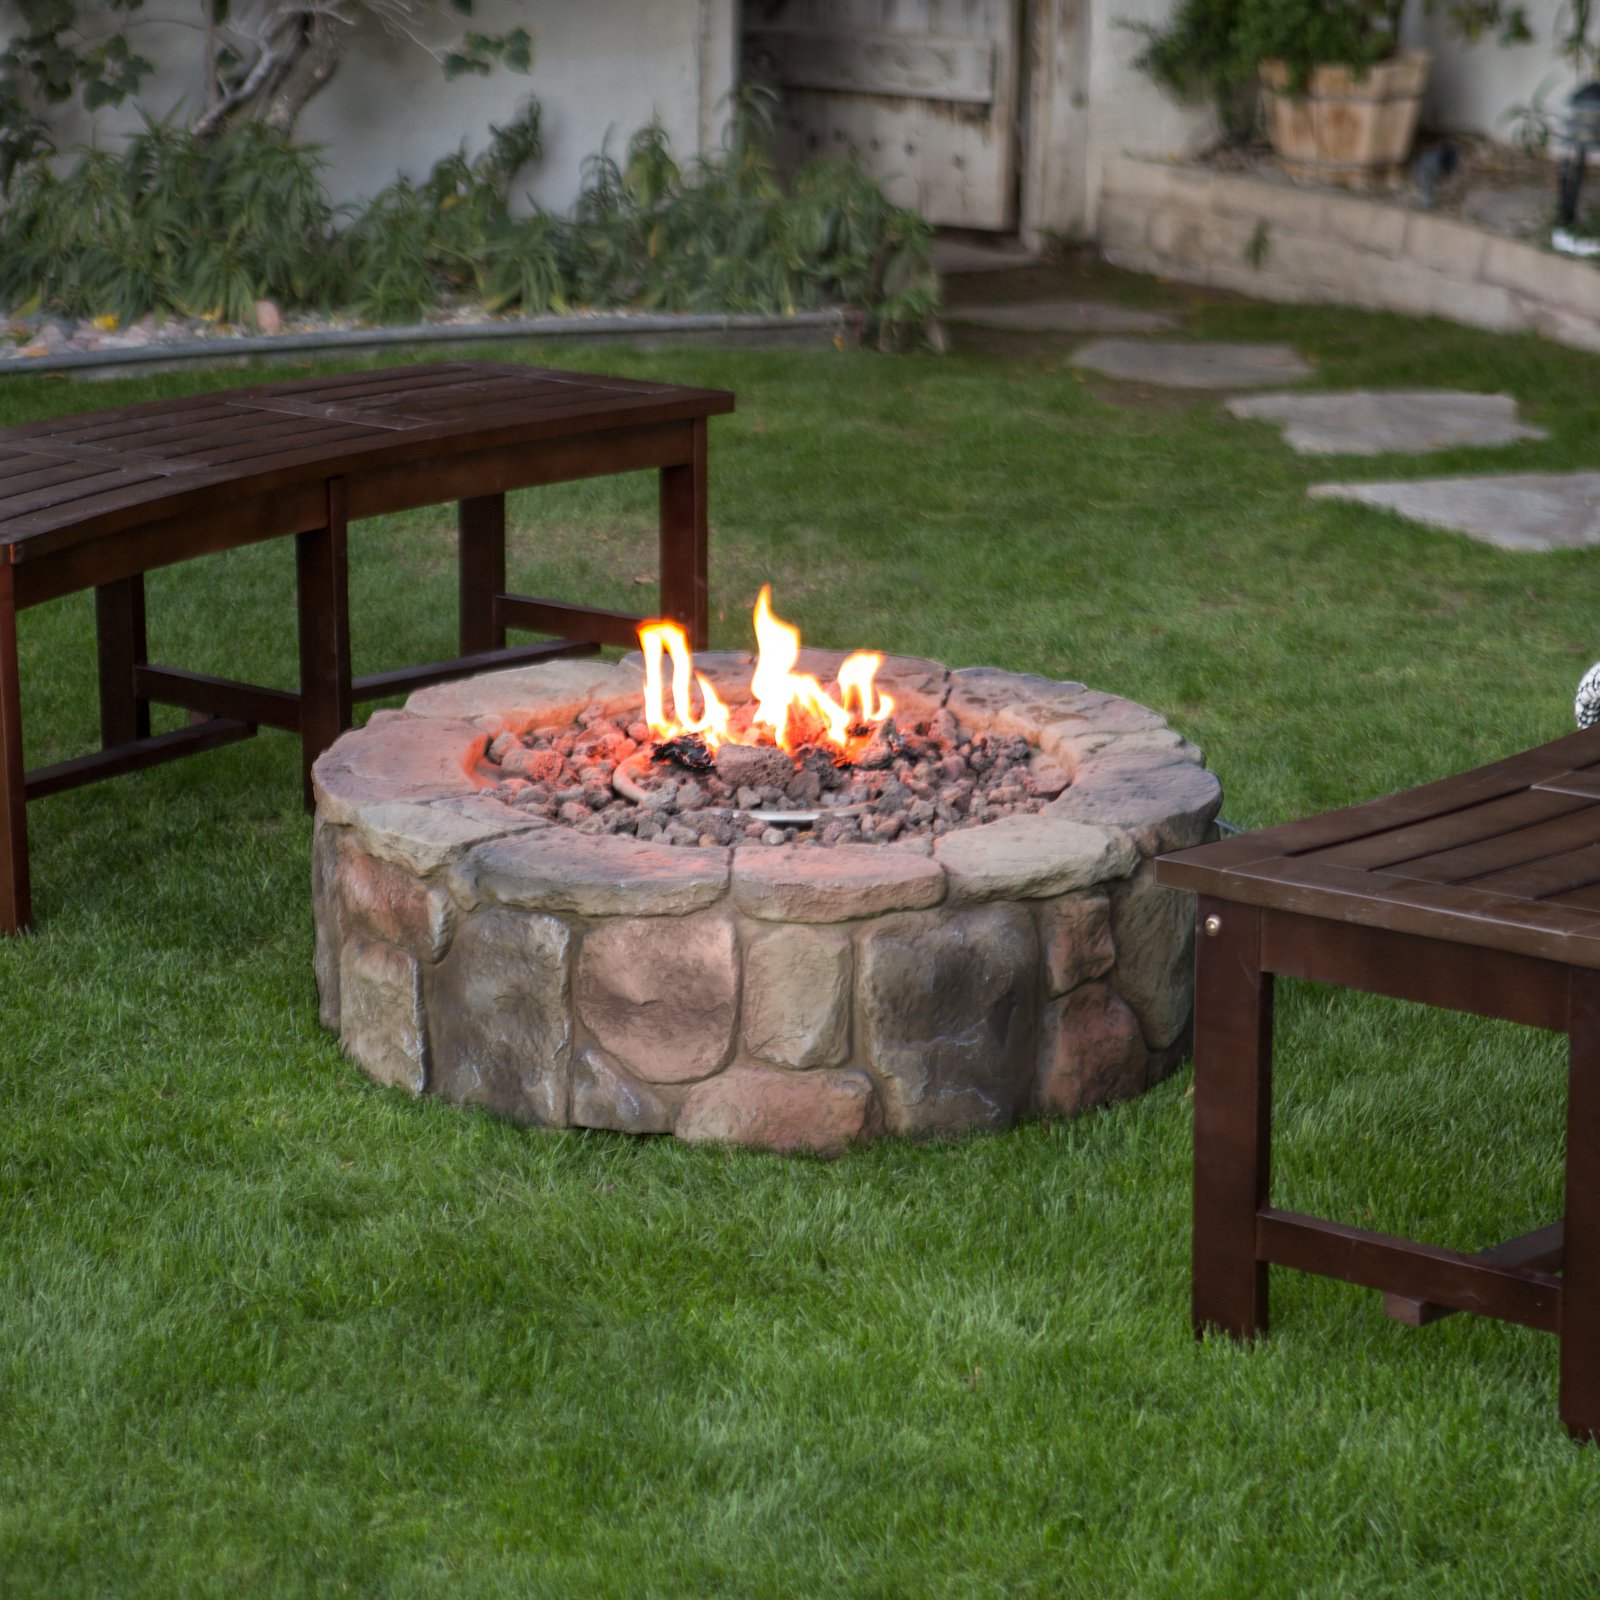 Fire Pit Burn Burning Charcoal, Bcp Stone Design Fire Pit